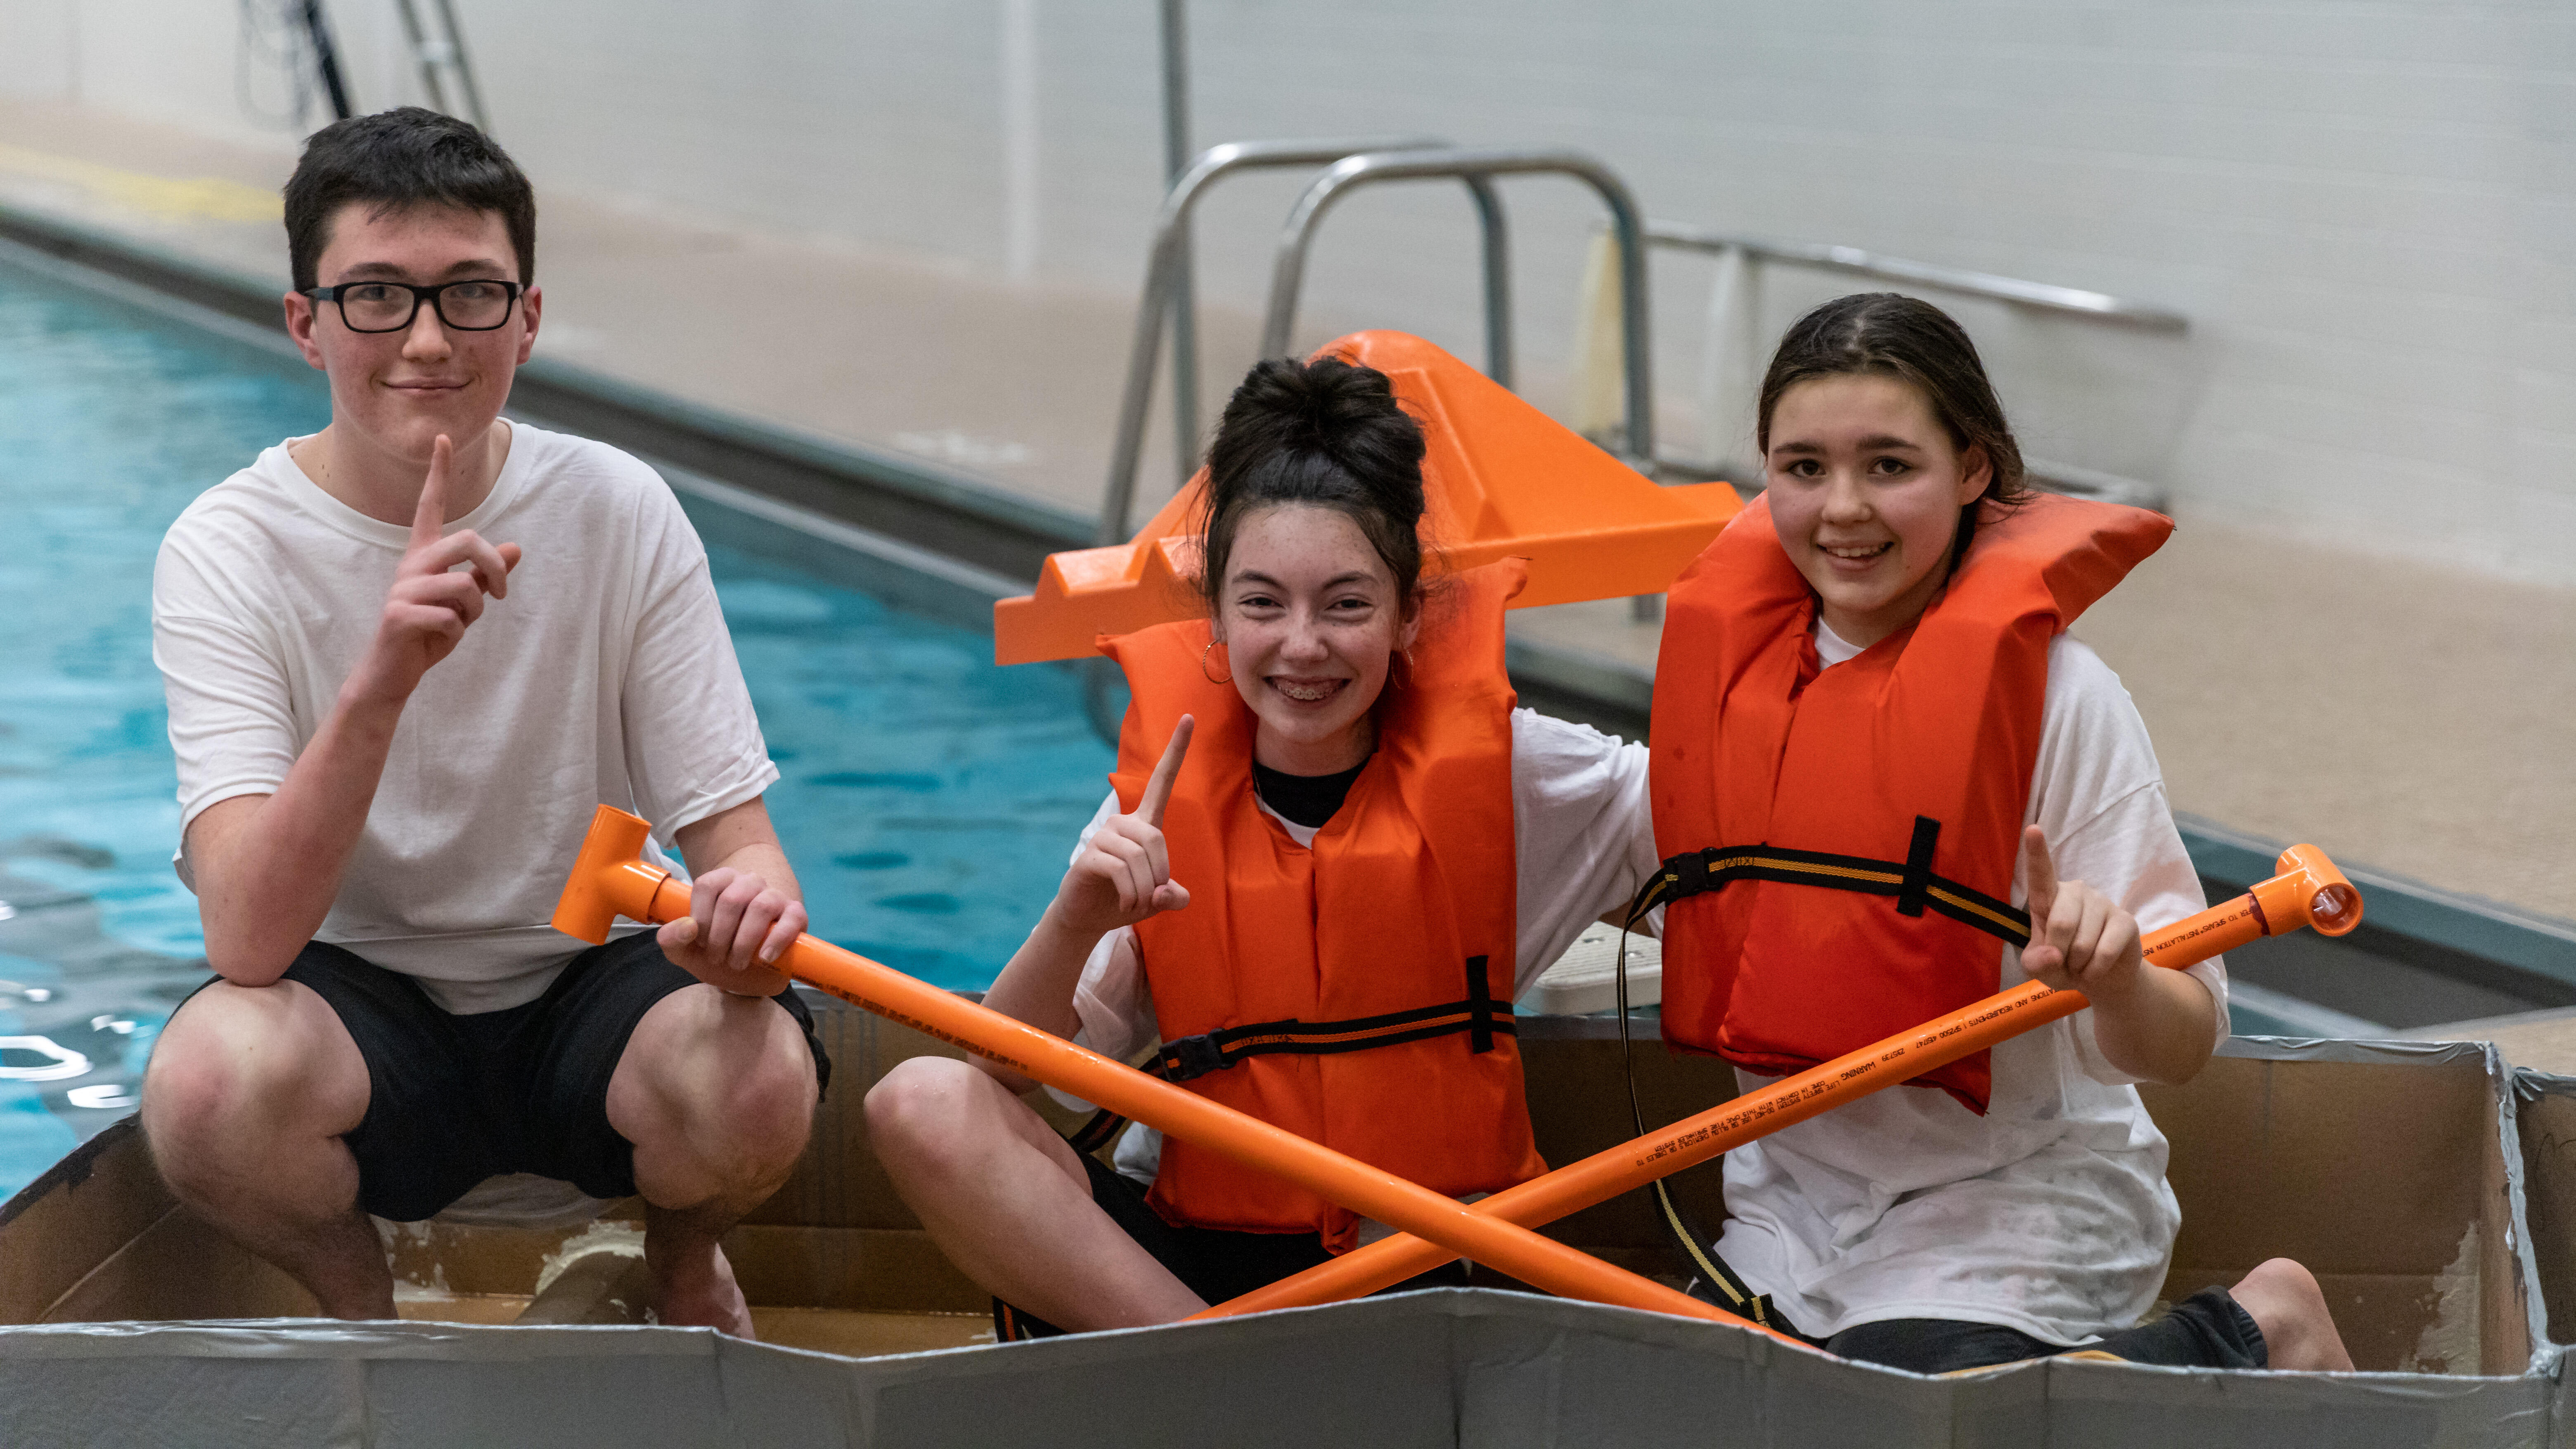 The winning team from Steel Valley Middle School's Sink or Swim Boat Race.